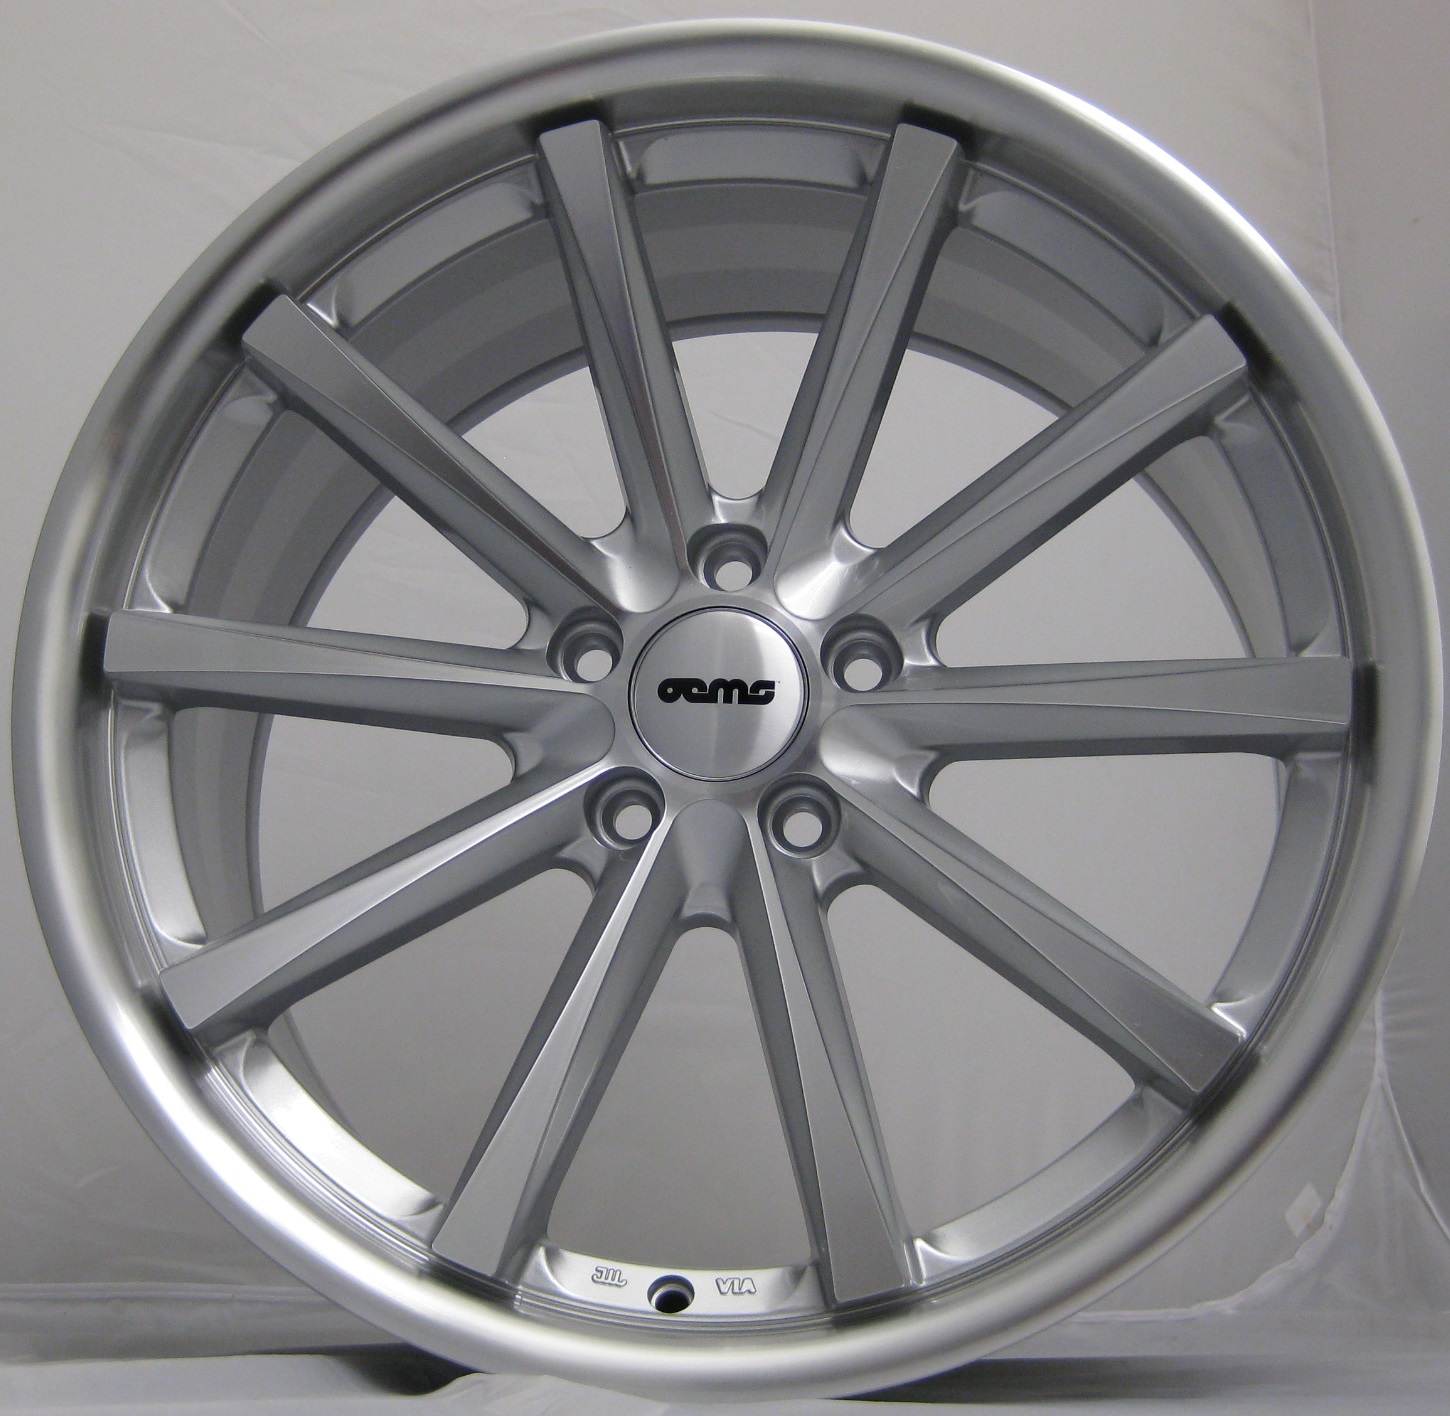 NEW 19" OEMS 110 CONCAVED ALLOYS IN SILVER WITH POLISHED DISH, WIDER 9.5" REAR et35/33